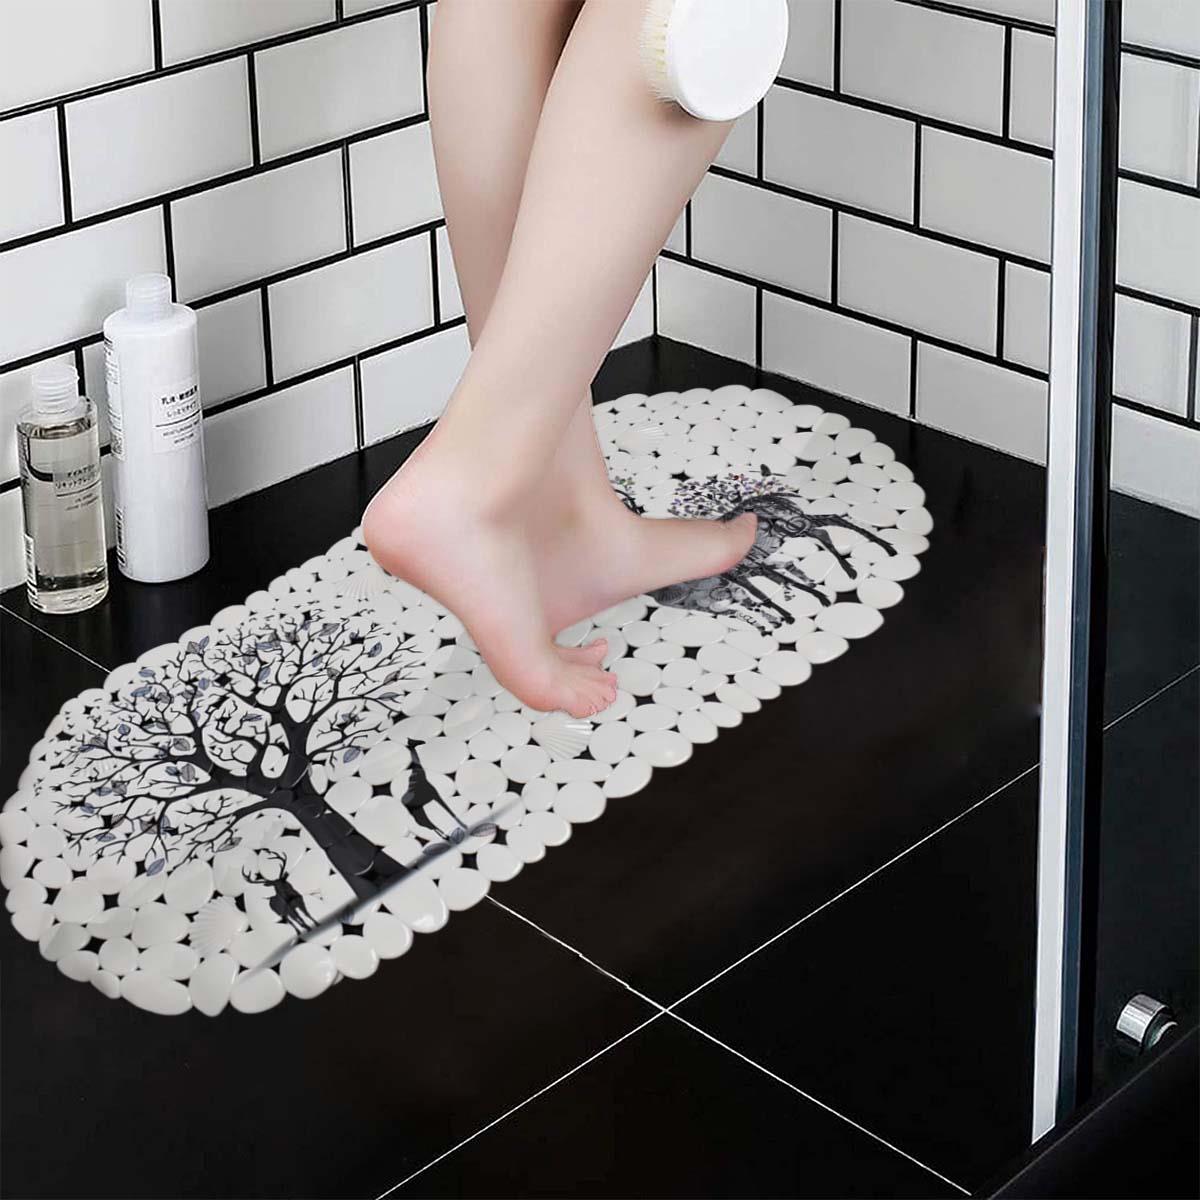 Kookee PVC Bath Mat Non-Slip Pebble Bathtub Mat L=69cm x W=35cm (for Smooth/Non-Textured Tubs Only) Safe Shower Mat with Drain Holes, Suction Cups for Bathroom (71-4935)